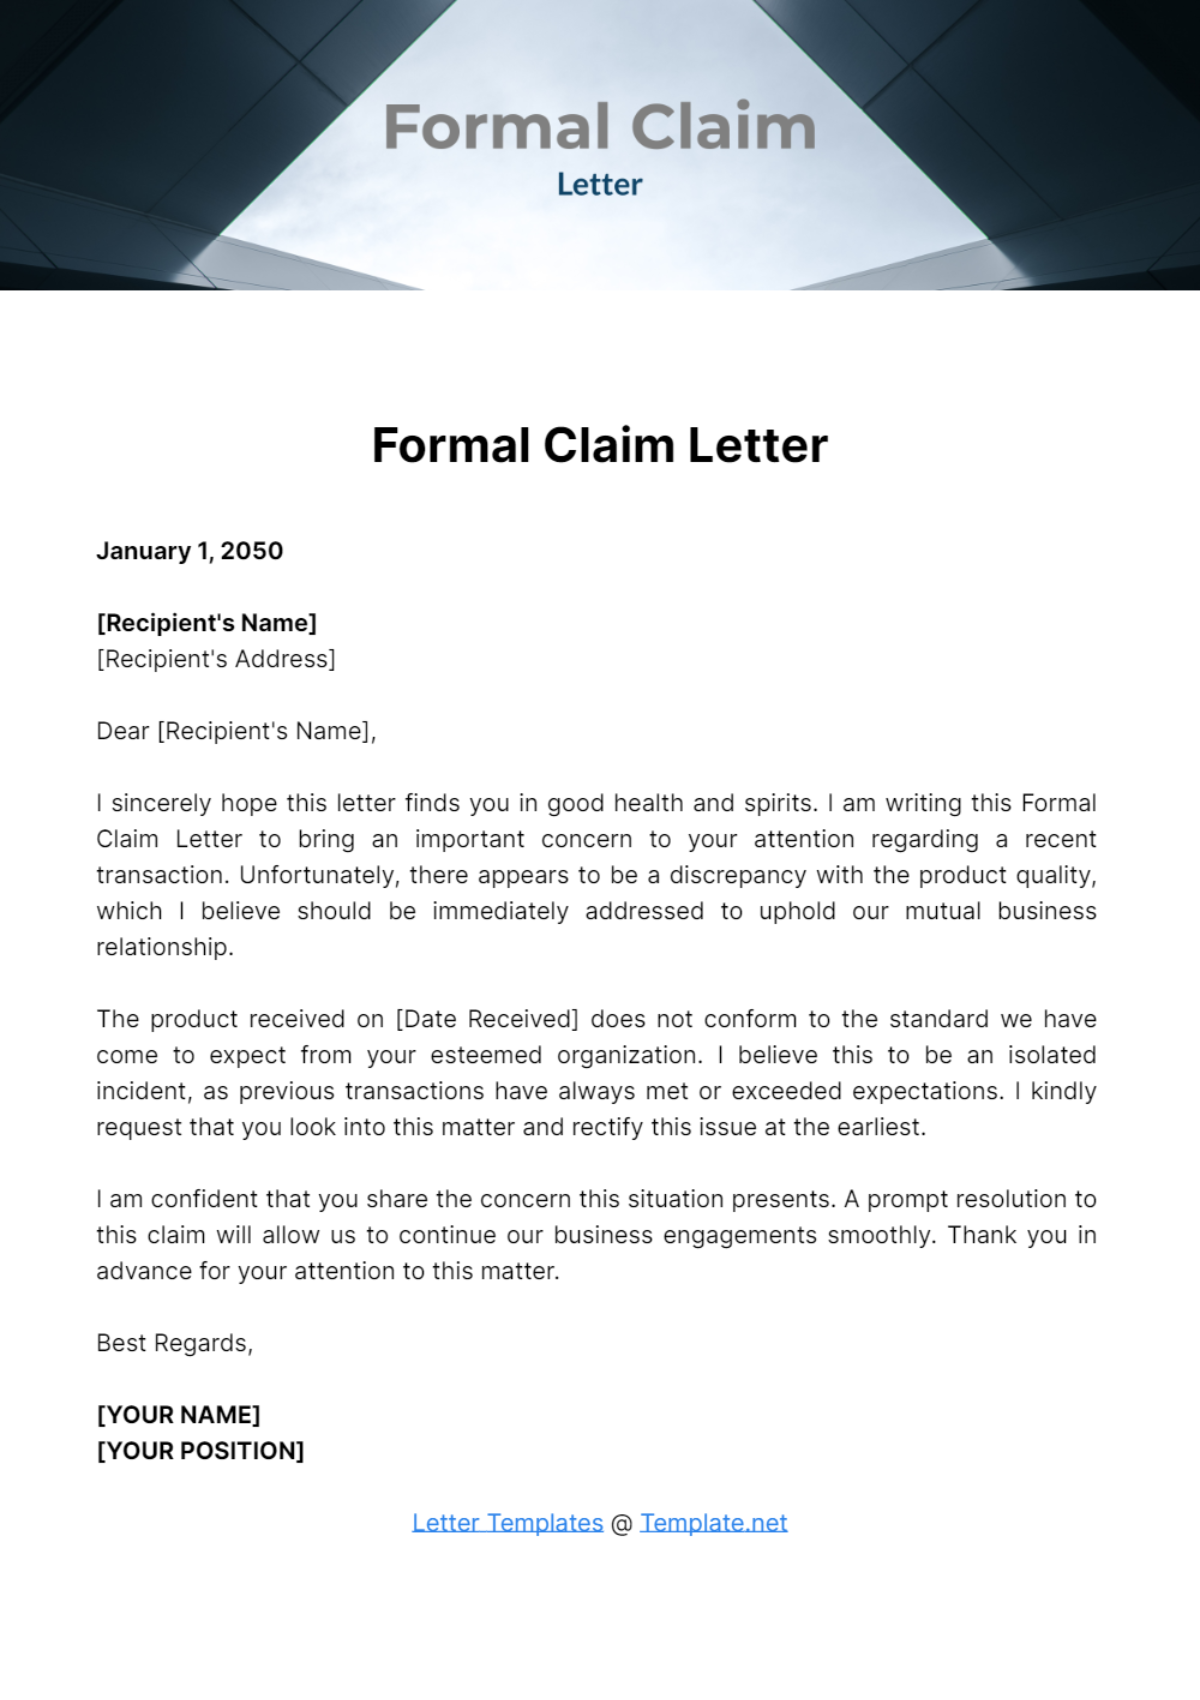 Formal Claim Letter Template